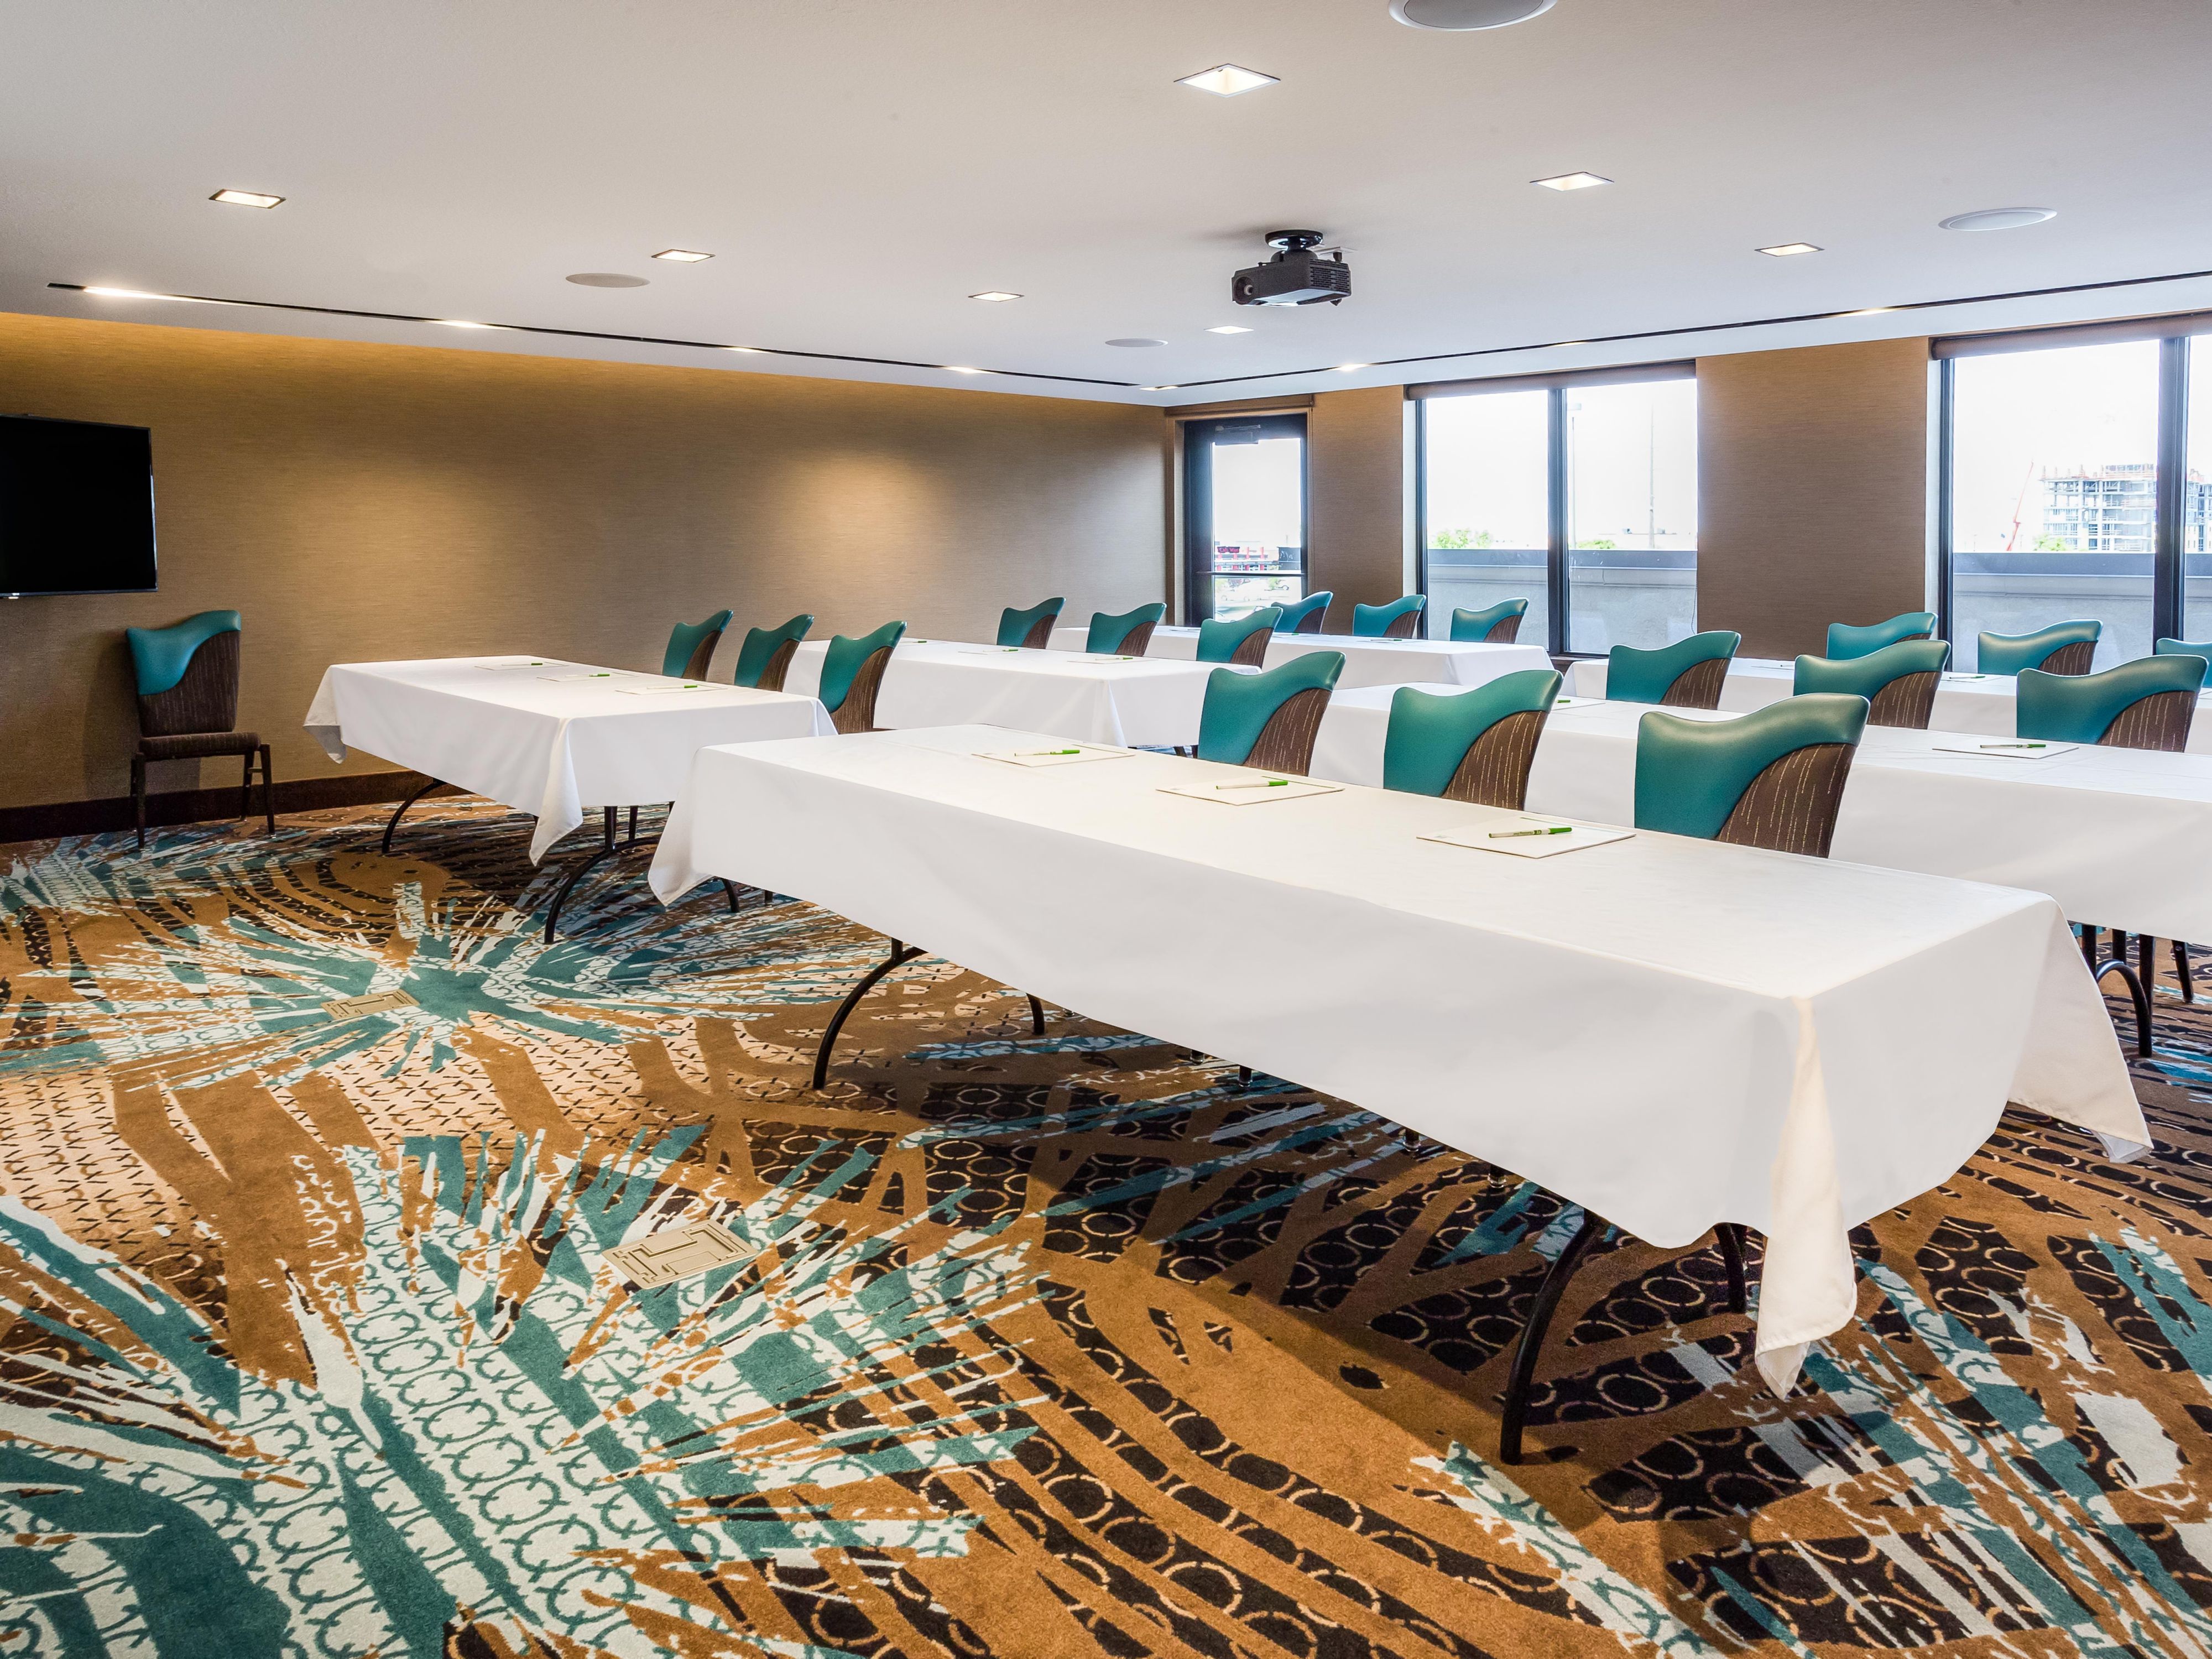 If you are attending a event at the Mountain America Expo Center, stay with us for great rates for yourself or for your group? We are only a 2 mile drive from the Expo Center. We offer group discounts in our newly renovated hotel, along with great amenities for all your group!